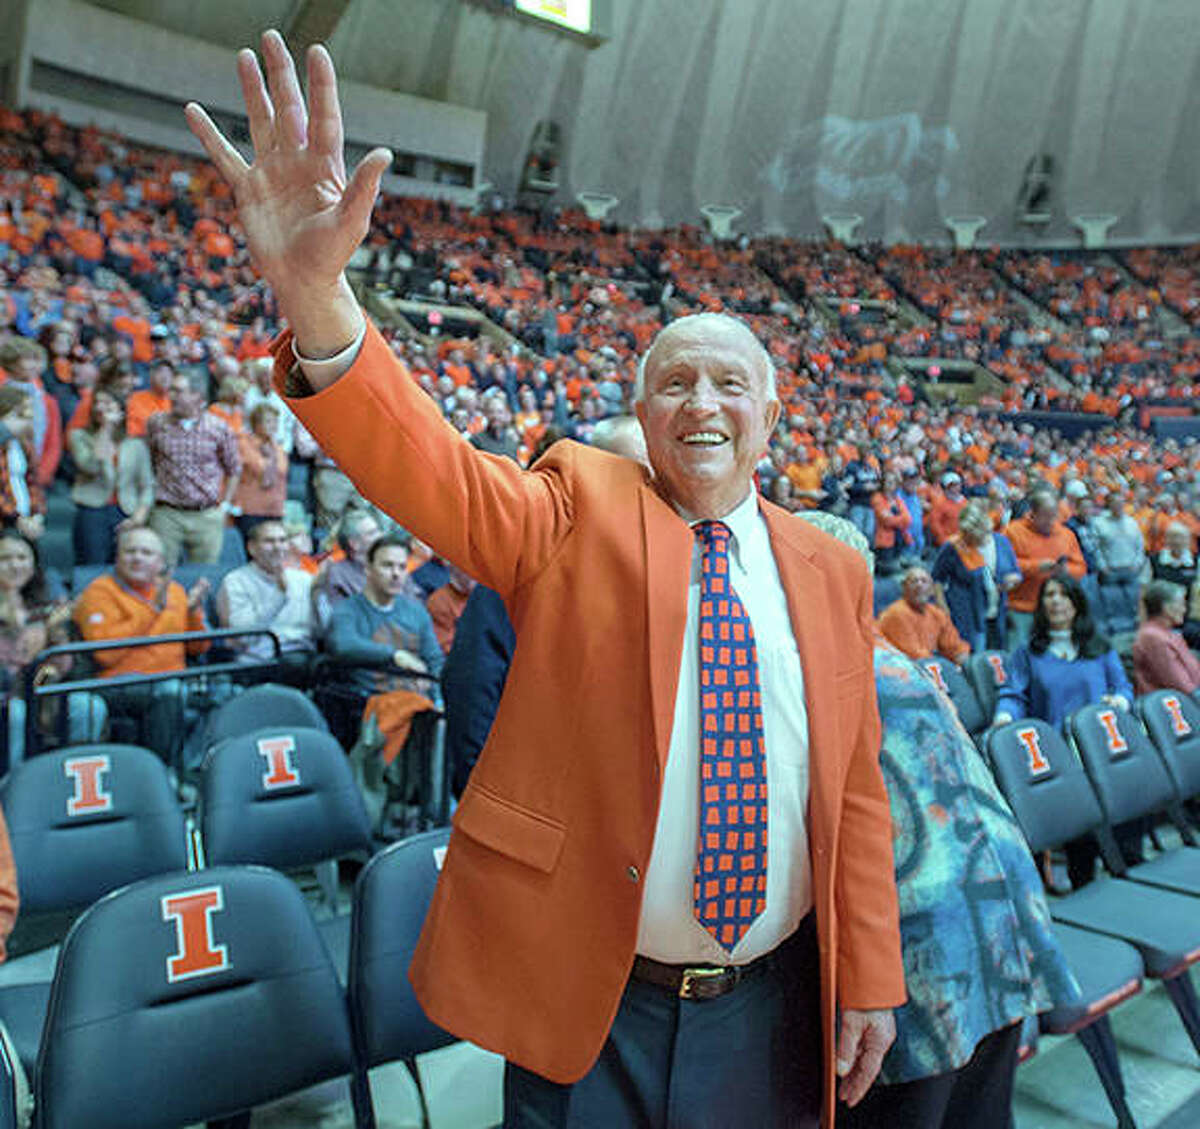 In this Dec. 2, 2015 photo, former University of Illinois basketball coach Lou Henson acknowledges the crowd while taking his seat courtside during the dedication of the court in his name at the State Farm Center in Champaign. Henson, the basketball coach who led Illinois back into the national spotlight, died July 25 at age 88.